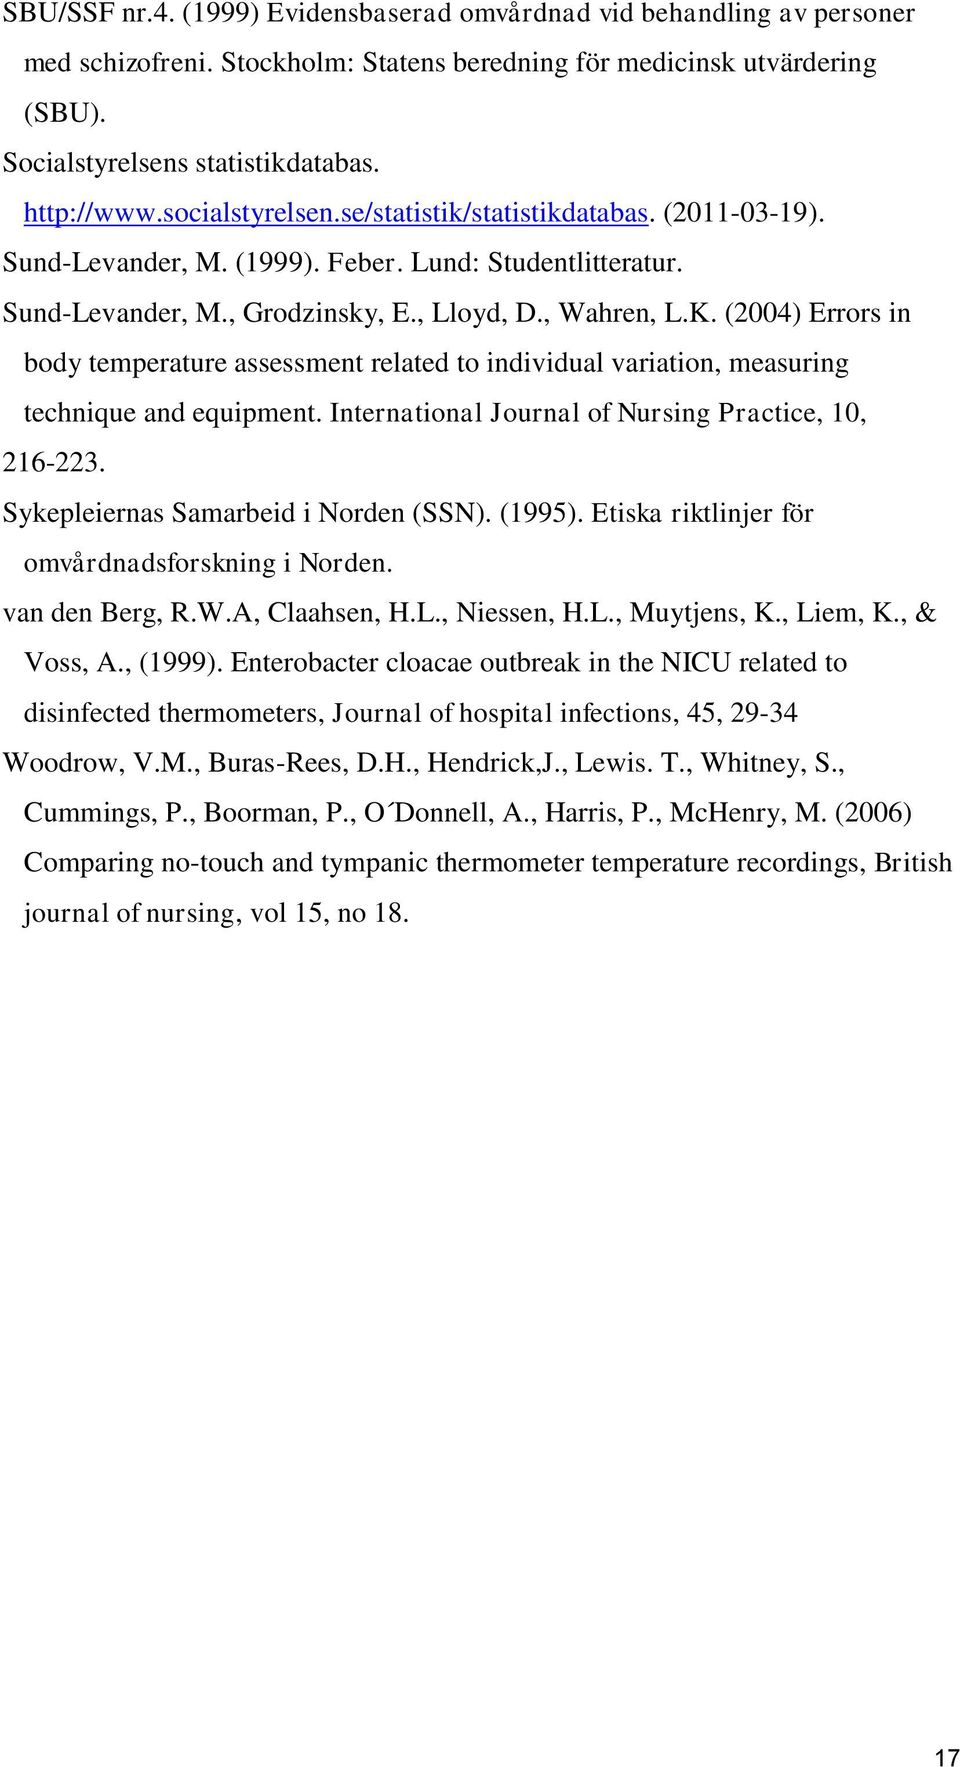 (2004) Errors in body temperature assessment related to individual variation, measuring technique and equipment. International Journal of Nursing Practice, 10, 216-223.